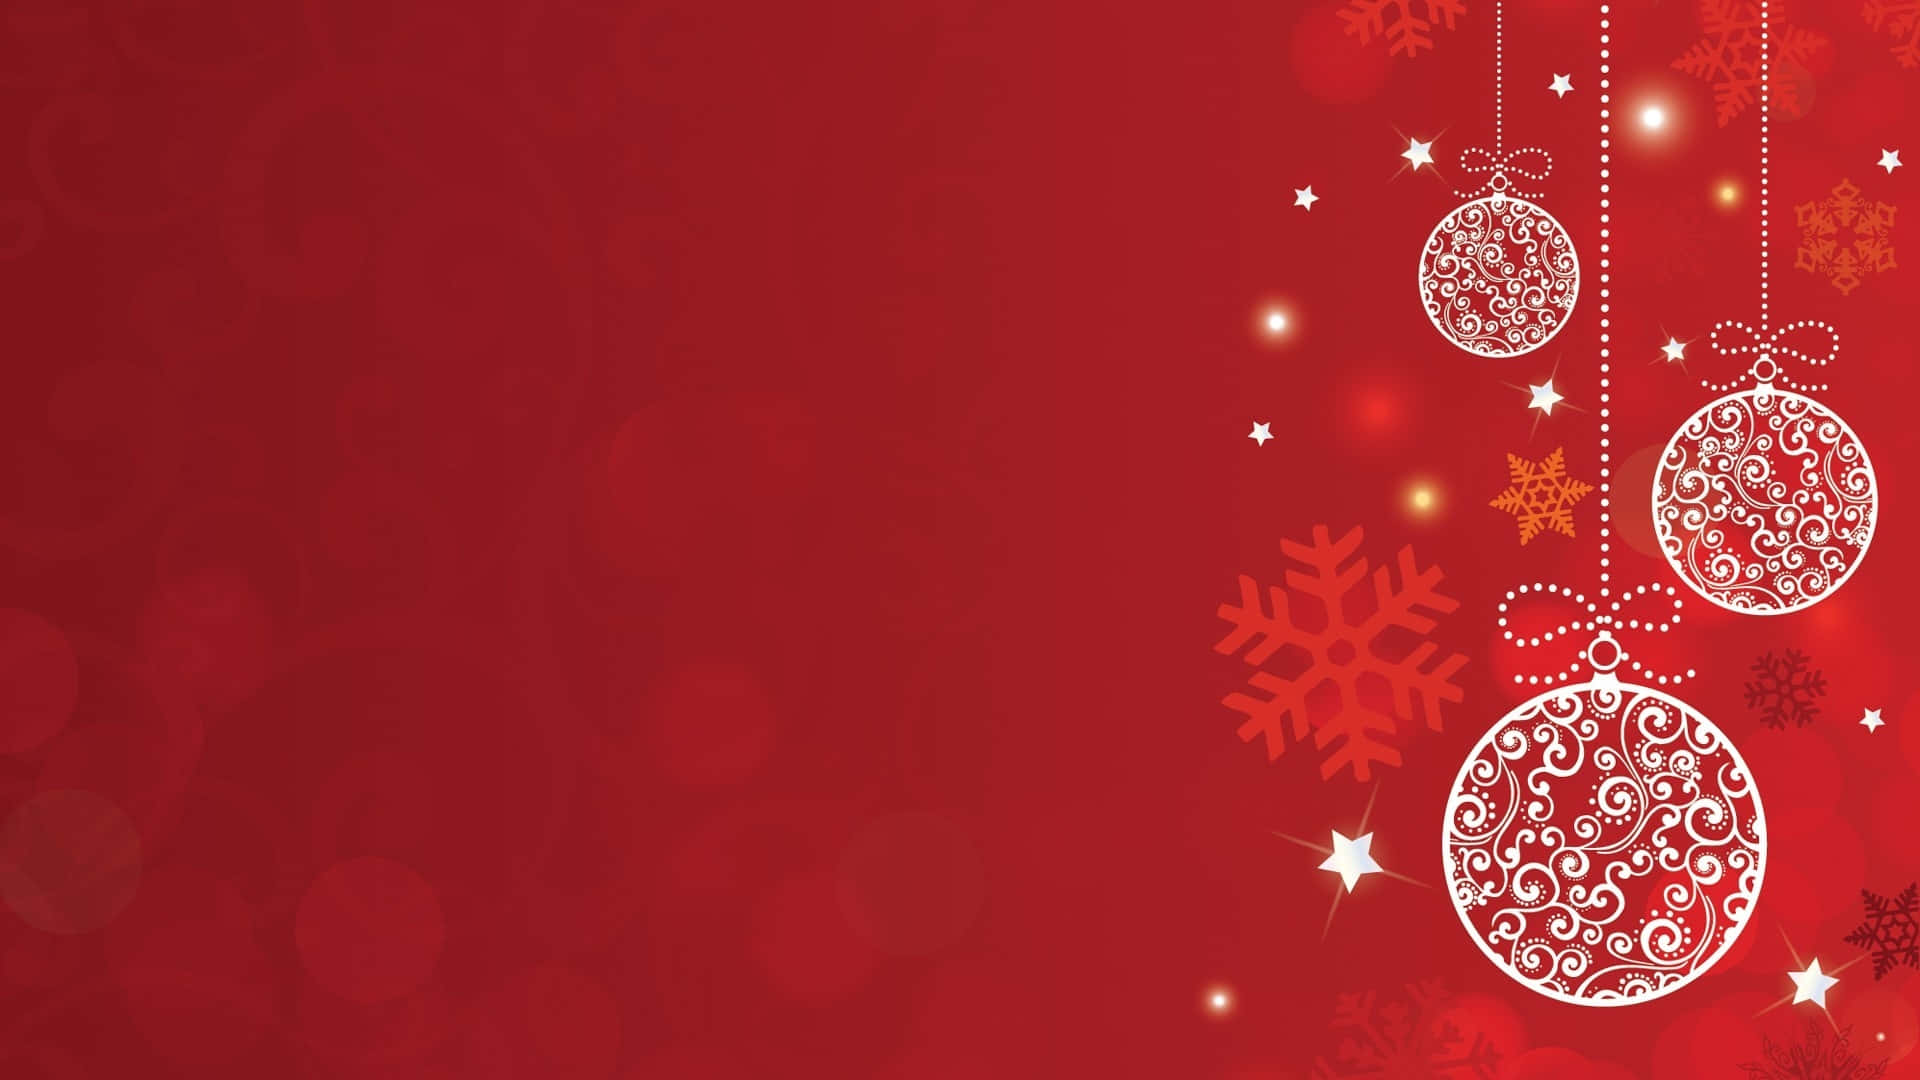 Bright and festive red Christmas background